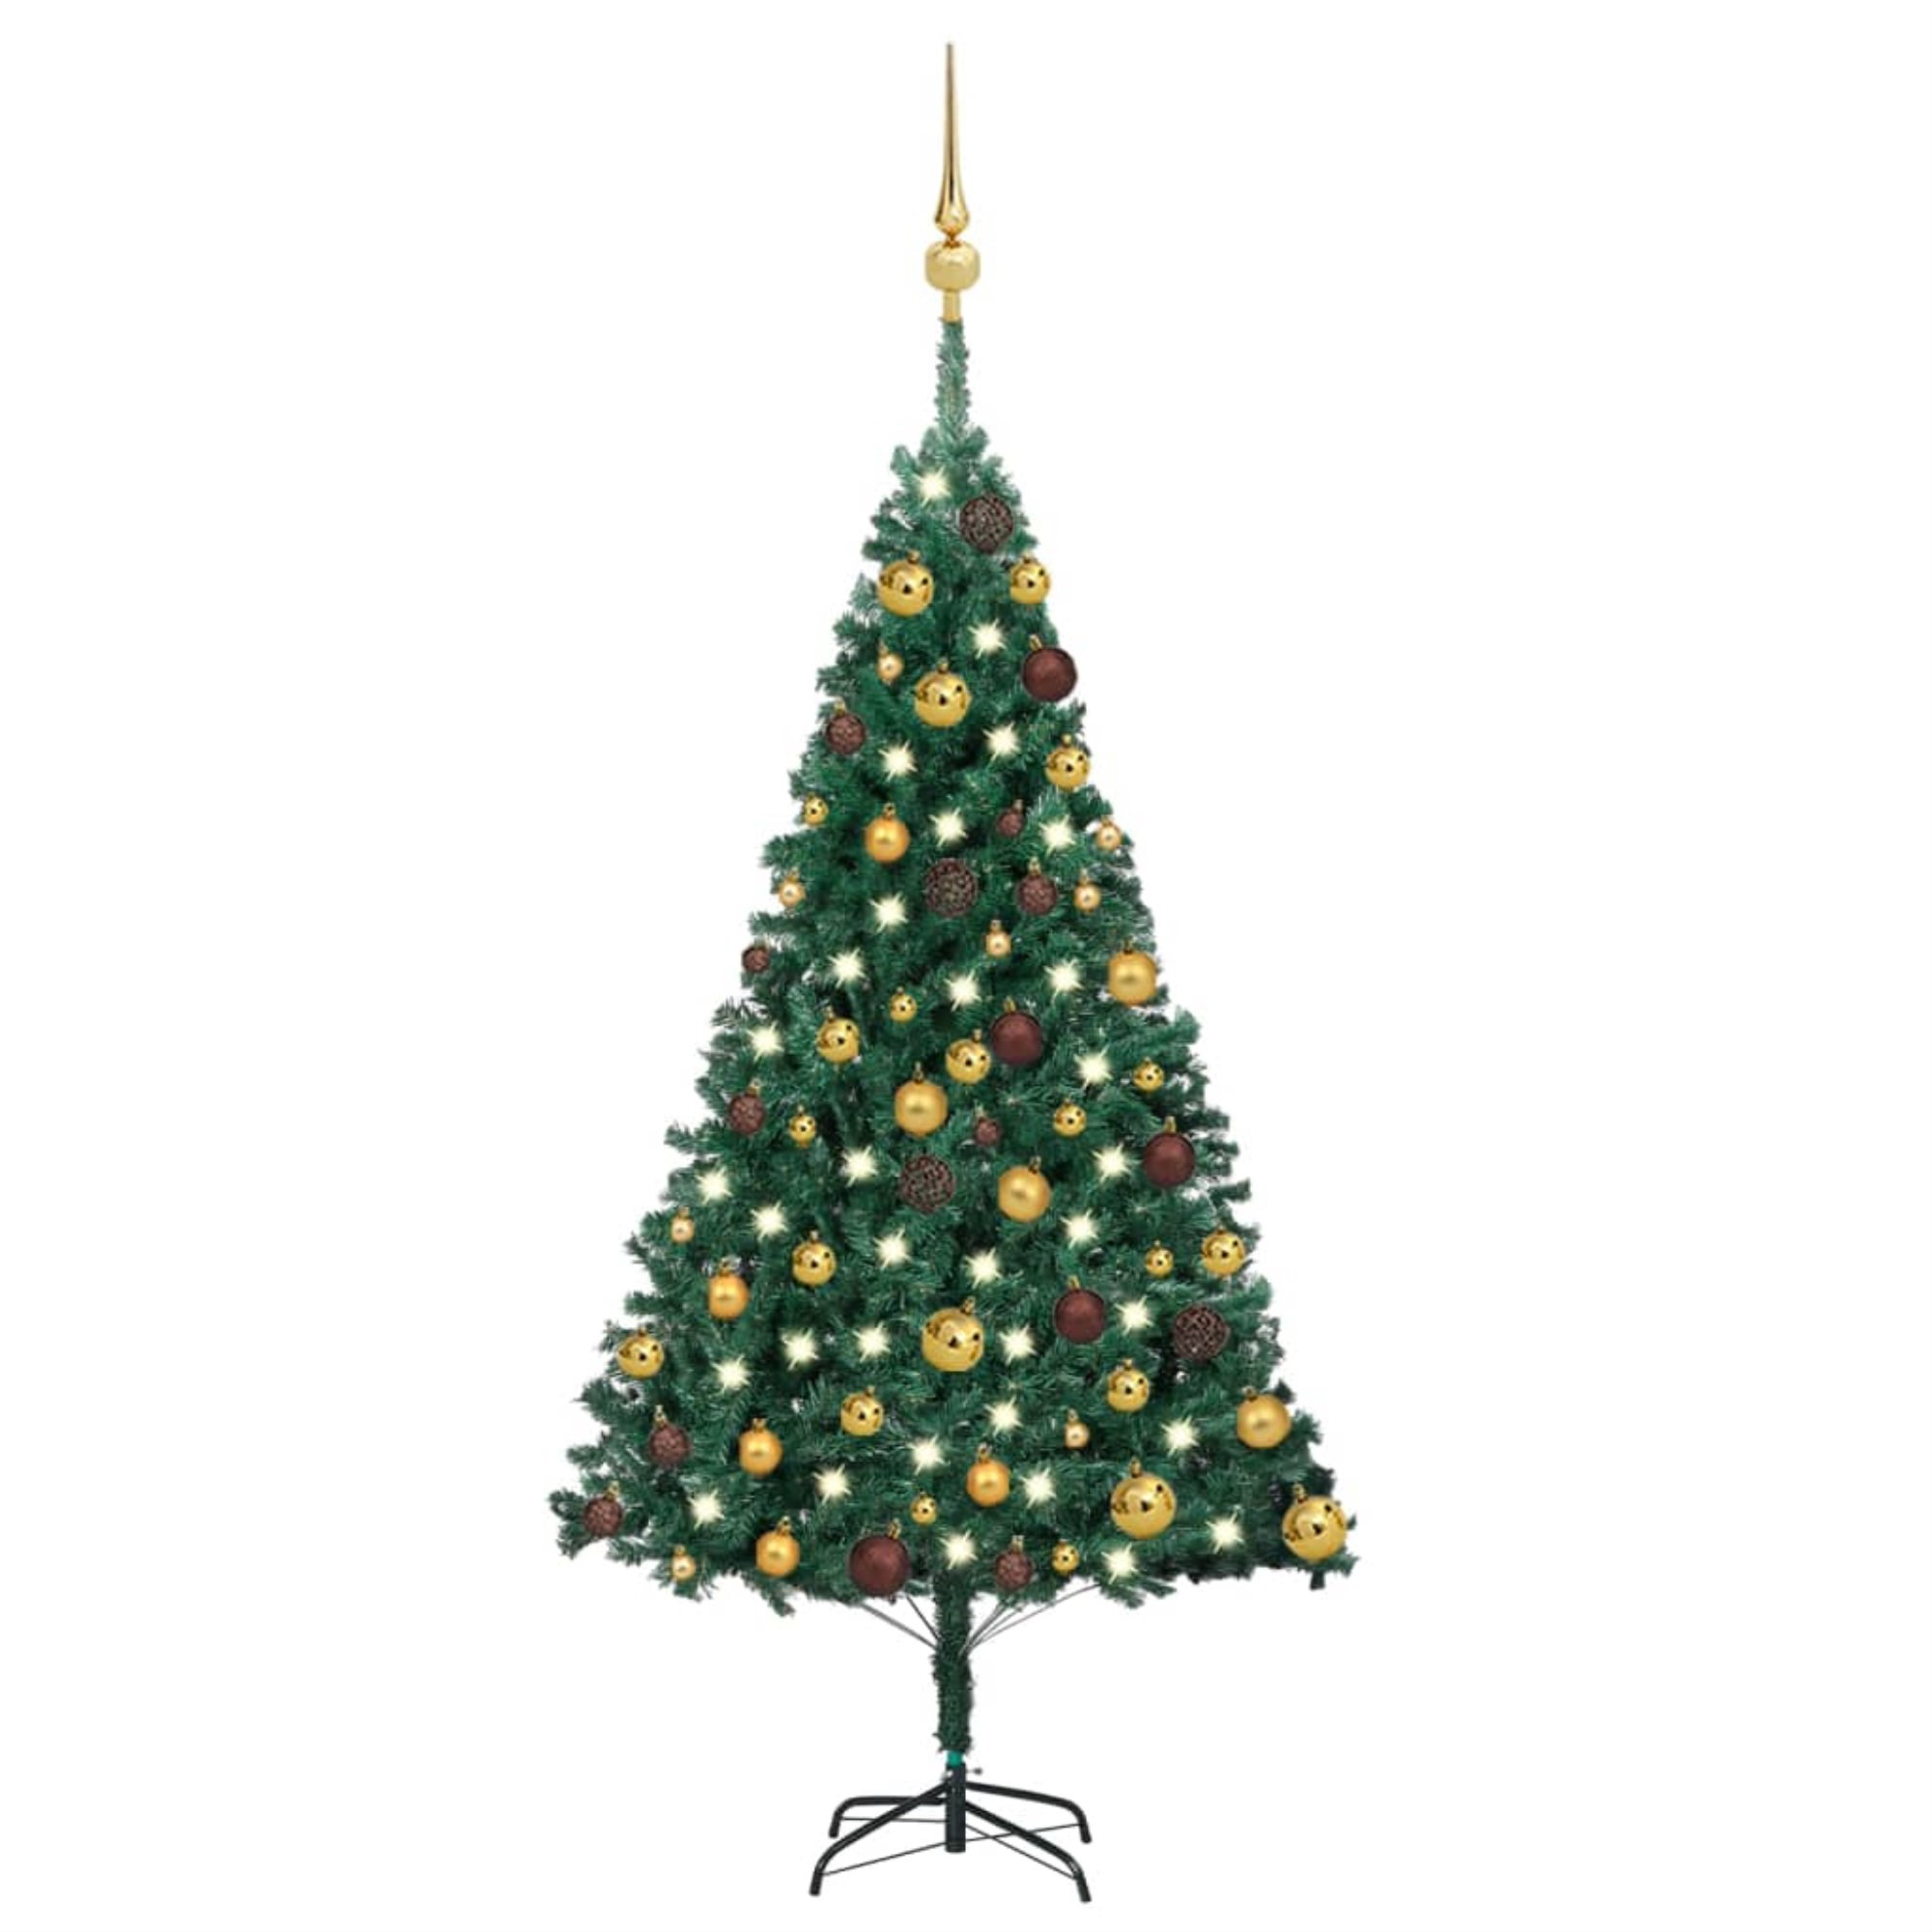 Green foam Christmas tree branch border with - Stock Photo